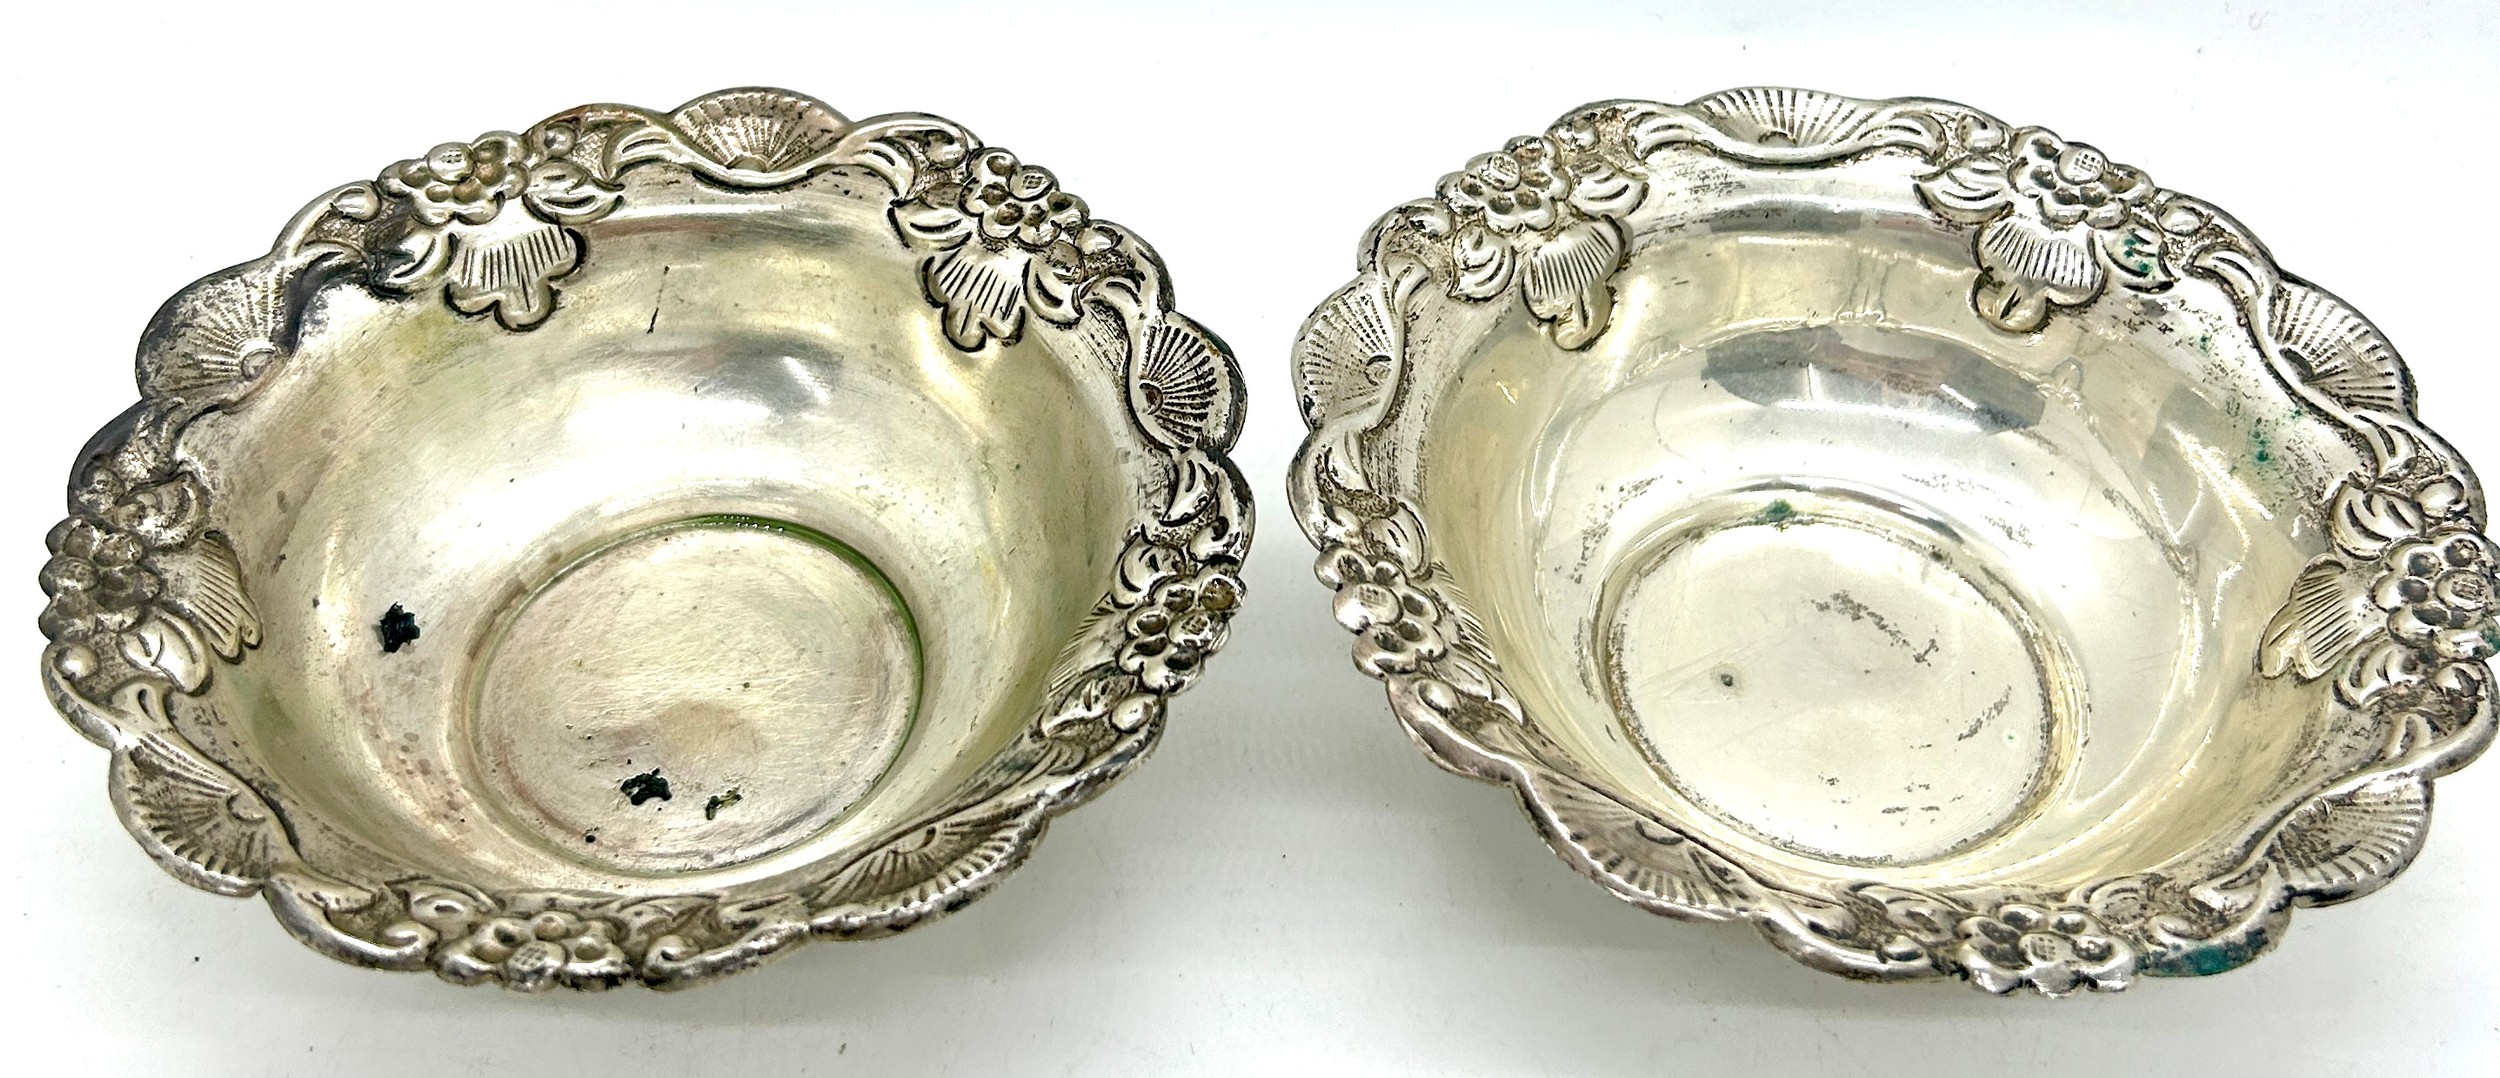 Pair continental silver trinkets / dishes, approximate height 3.5 inches, diameter 12.5 inches